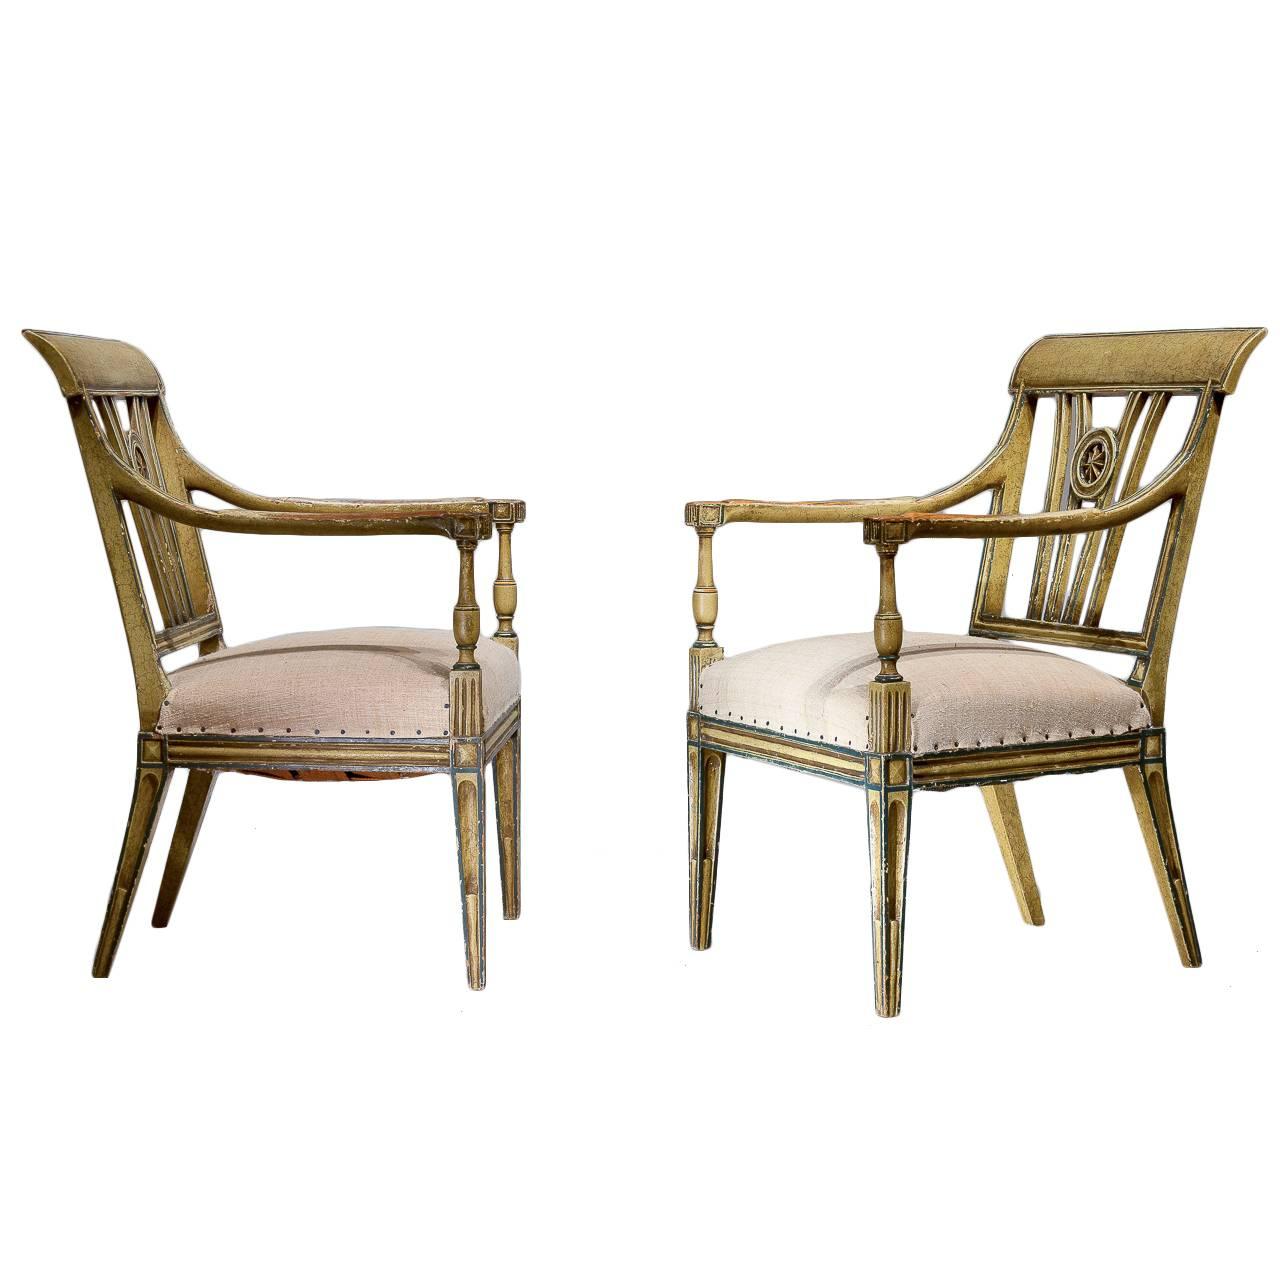 Pair of Early 20th Century Painted Chairs For Sale